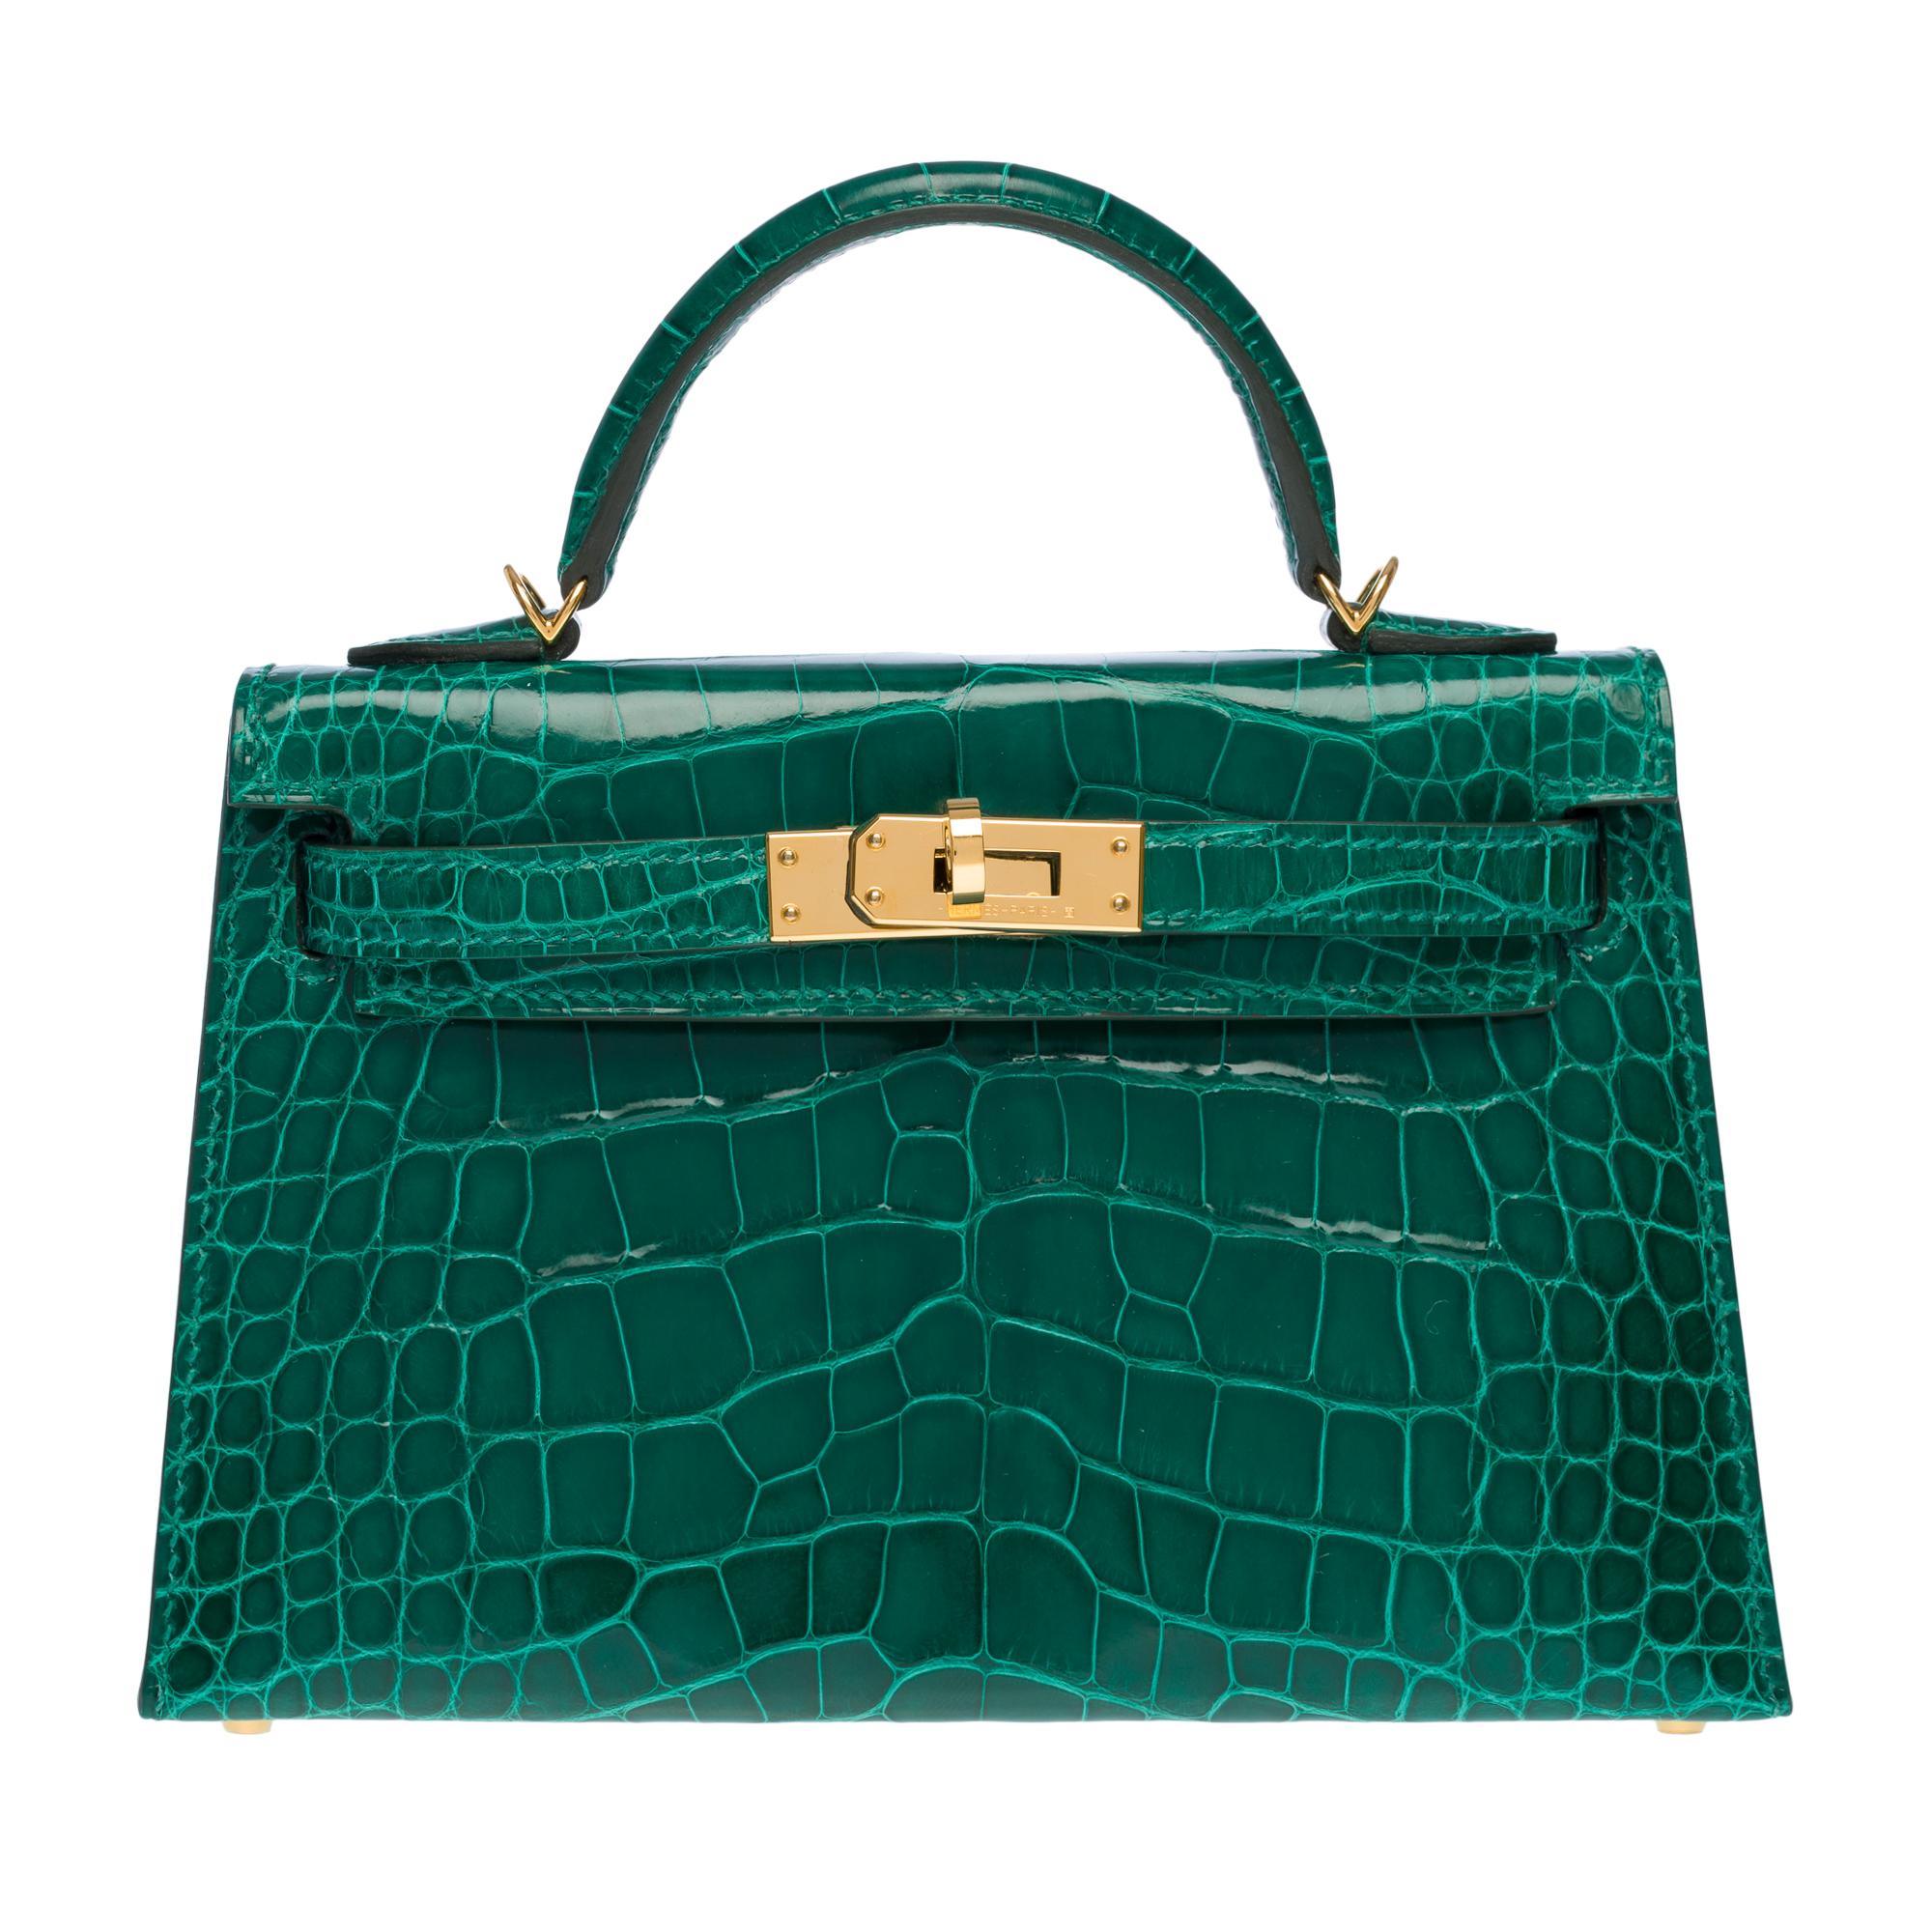 SPECIAL ORDER (HSO, HORSESHOE)

Houlux Paris is proud to present an almost unique Gem of Hermès' know-how: 
Hermes Mini Kelly 20 handbag strap in esmerald green alligator mississippiensis , gold plated metal hardware, removable shoulder strap in